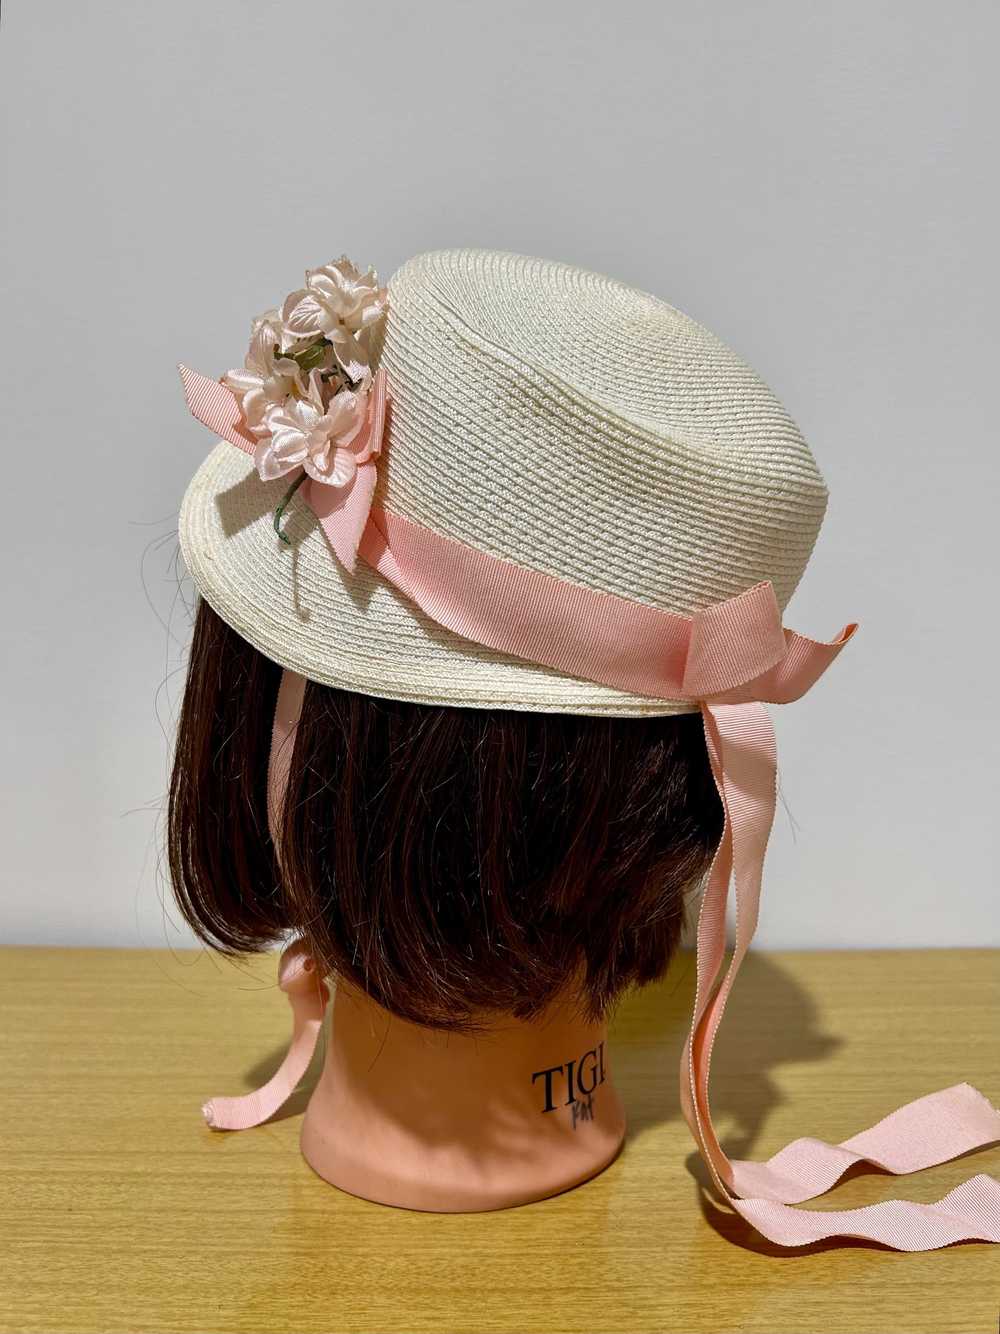 Vintage Sun Hat with Pink Ribbon and Flowers - image 3